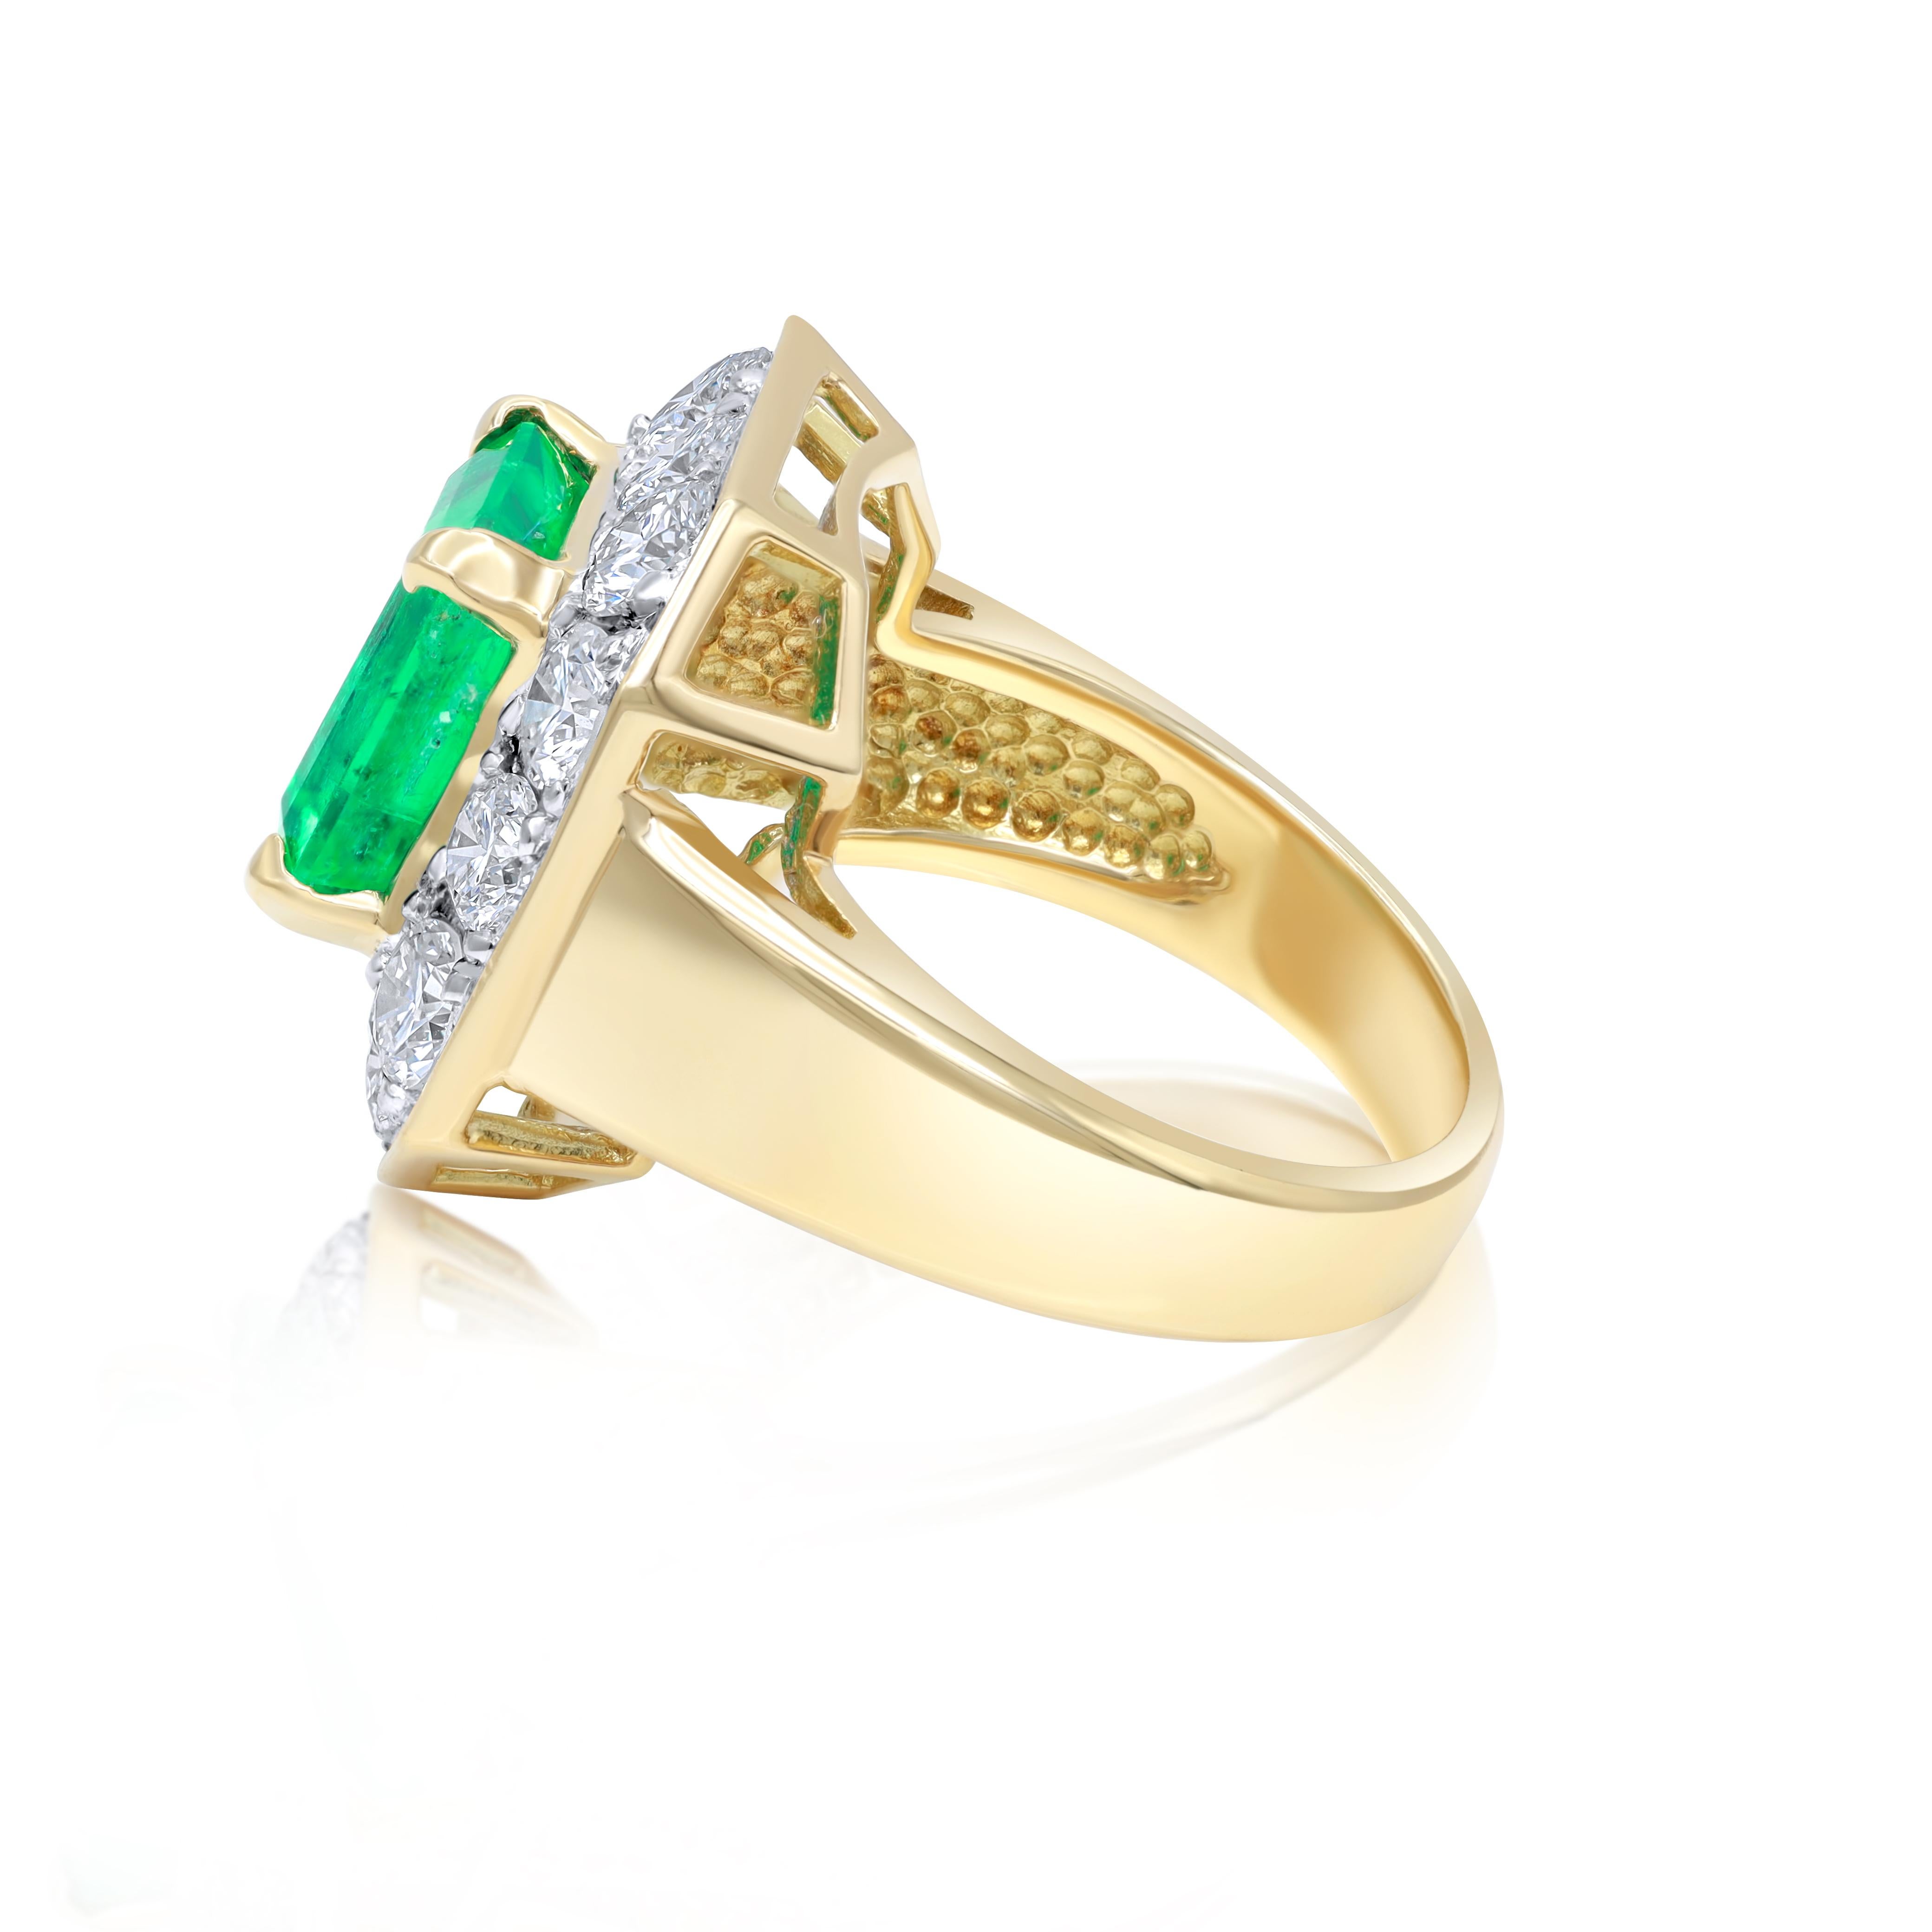 18 kt yellow gold emerald and diamond ring featuring a center 3.70 ct emerald surrounded by 2.40 cts tw of round diamonds.
Diana M. is a leading supplier of top-quality fine jewelry for over 35 years.
Diana M is one-stop shop for all your jewelry